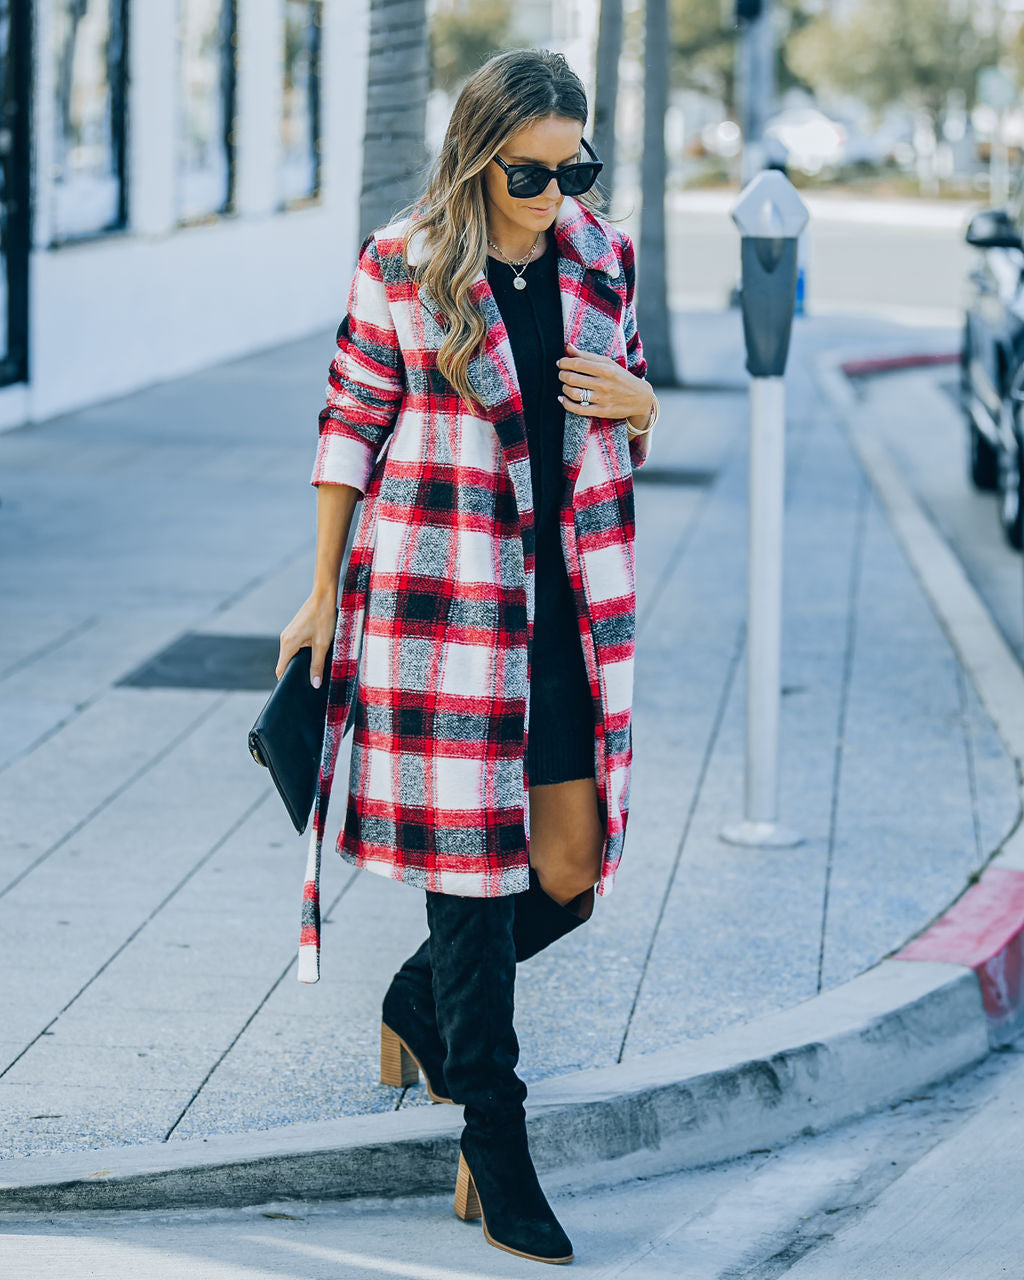 Wishful Winter Pocketed Plaid Coat - Red